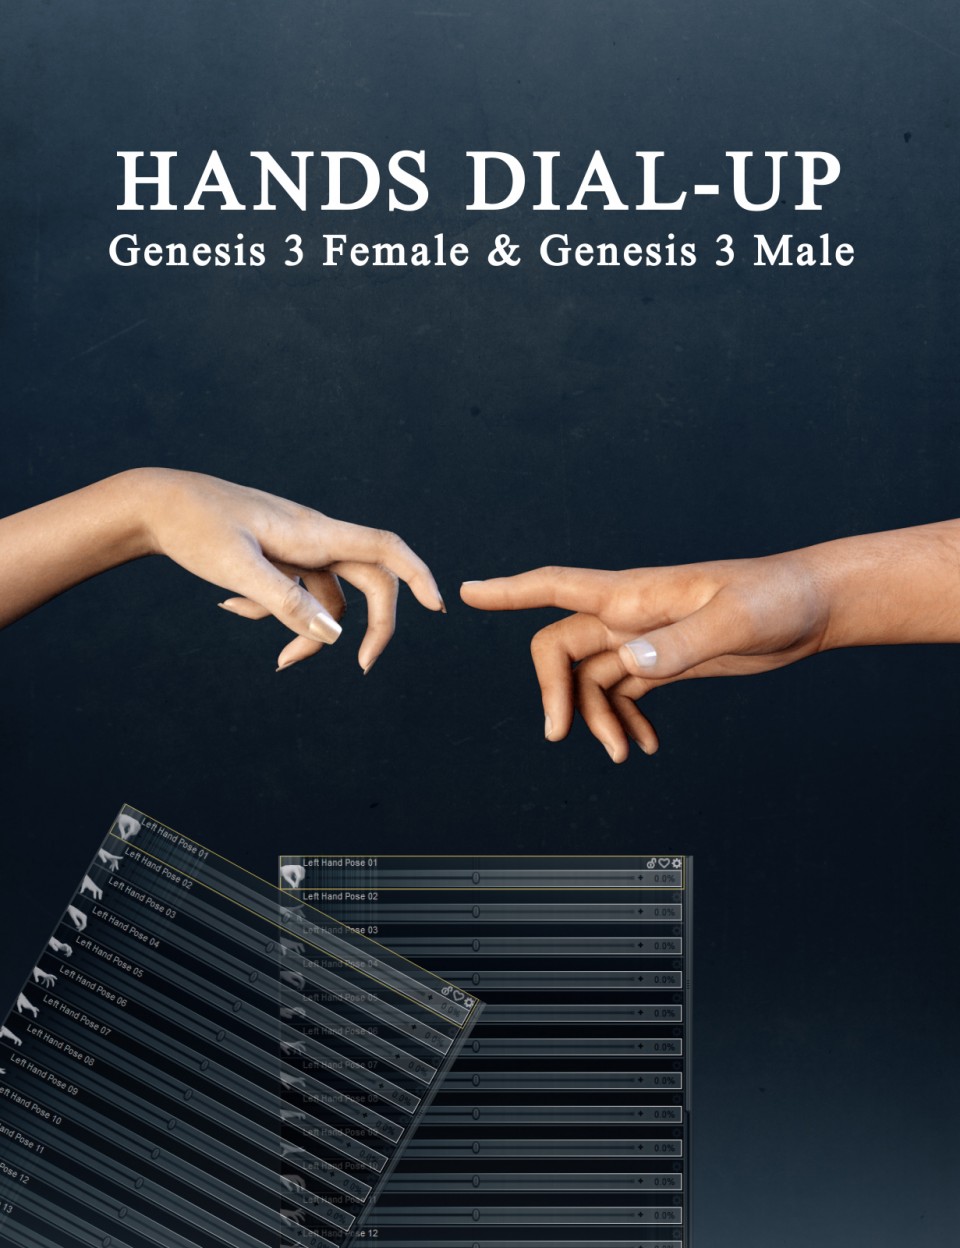 Hands Dial-up for Genesis 3 Male and Female_DAZ3D下载站